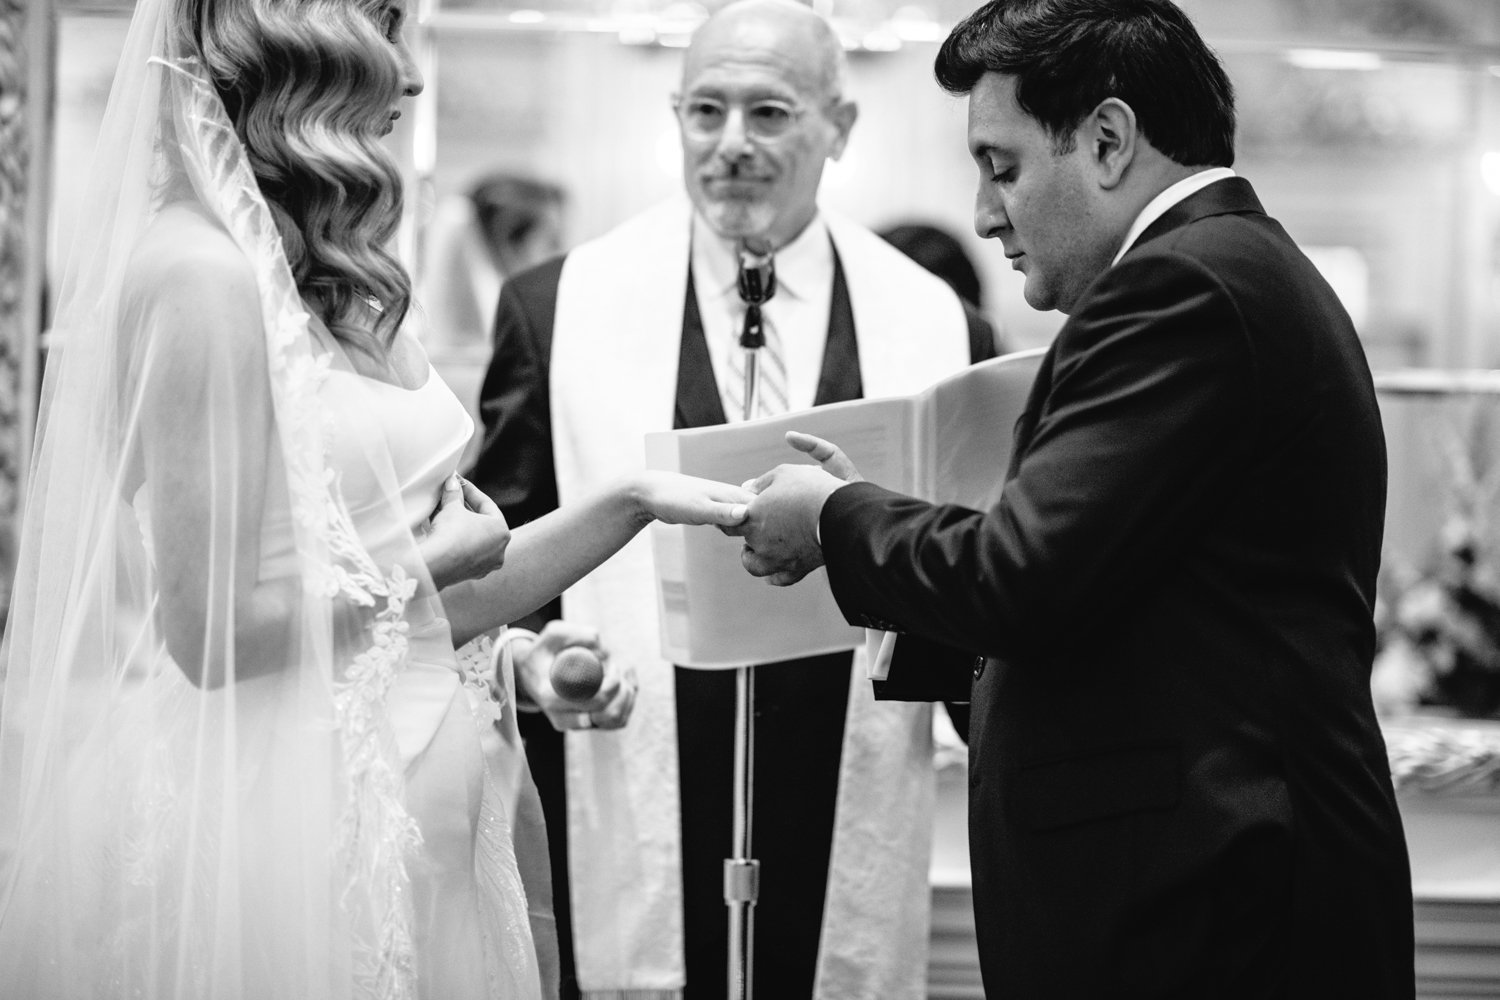 Groom holds the bride's hand at the altar and places a wedding ring on her finger. The wedding officiant stands behind them.

Manhattan Luxury Wedding. New York Luxury Wedding Photographer. Wedding in Manhattan. NYC Luxury Wedding.